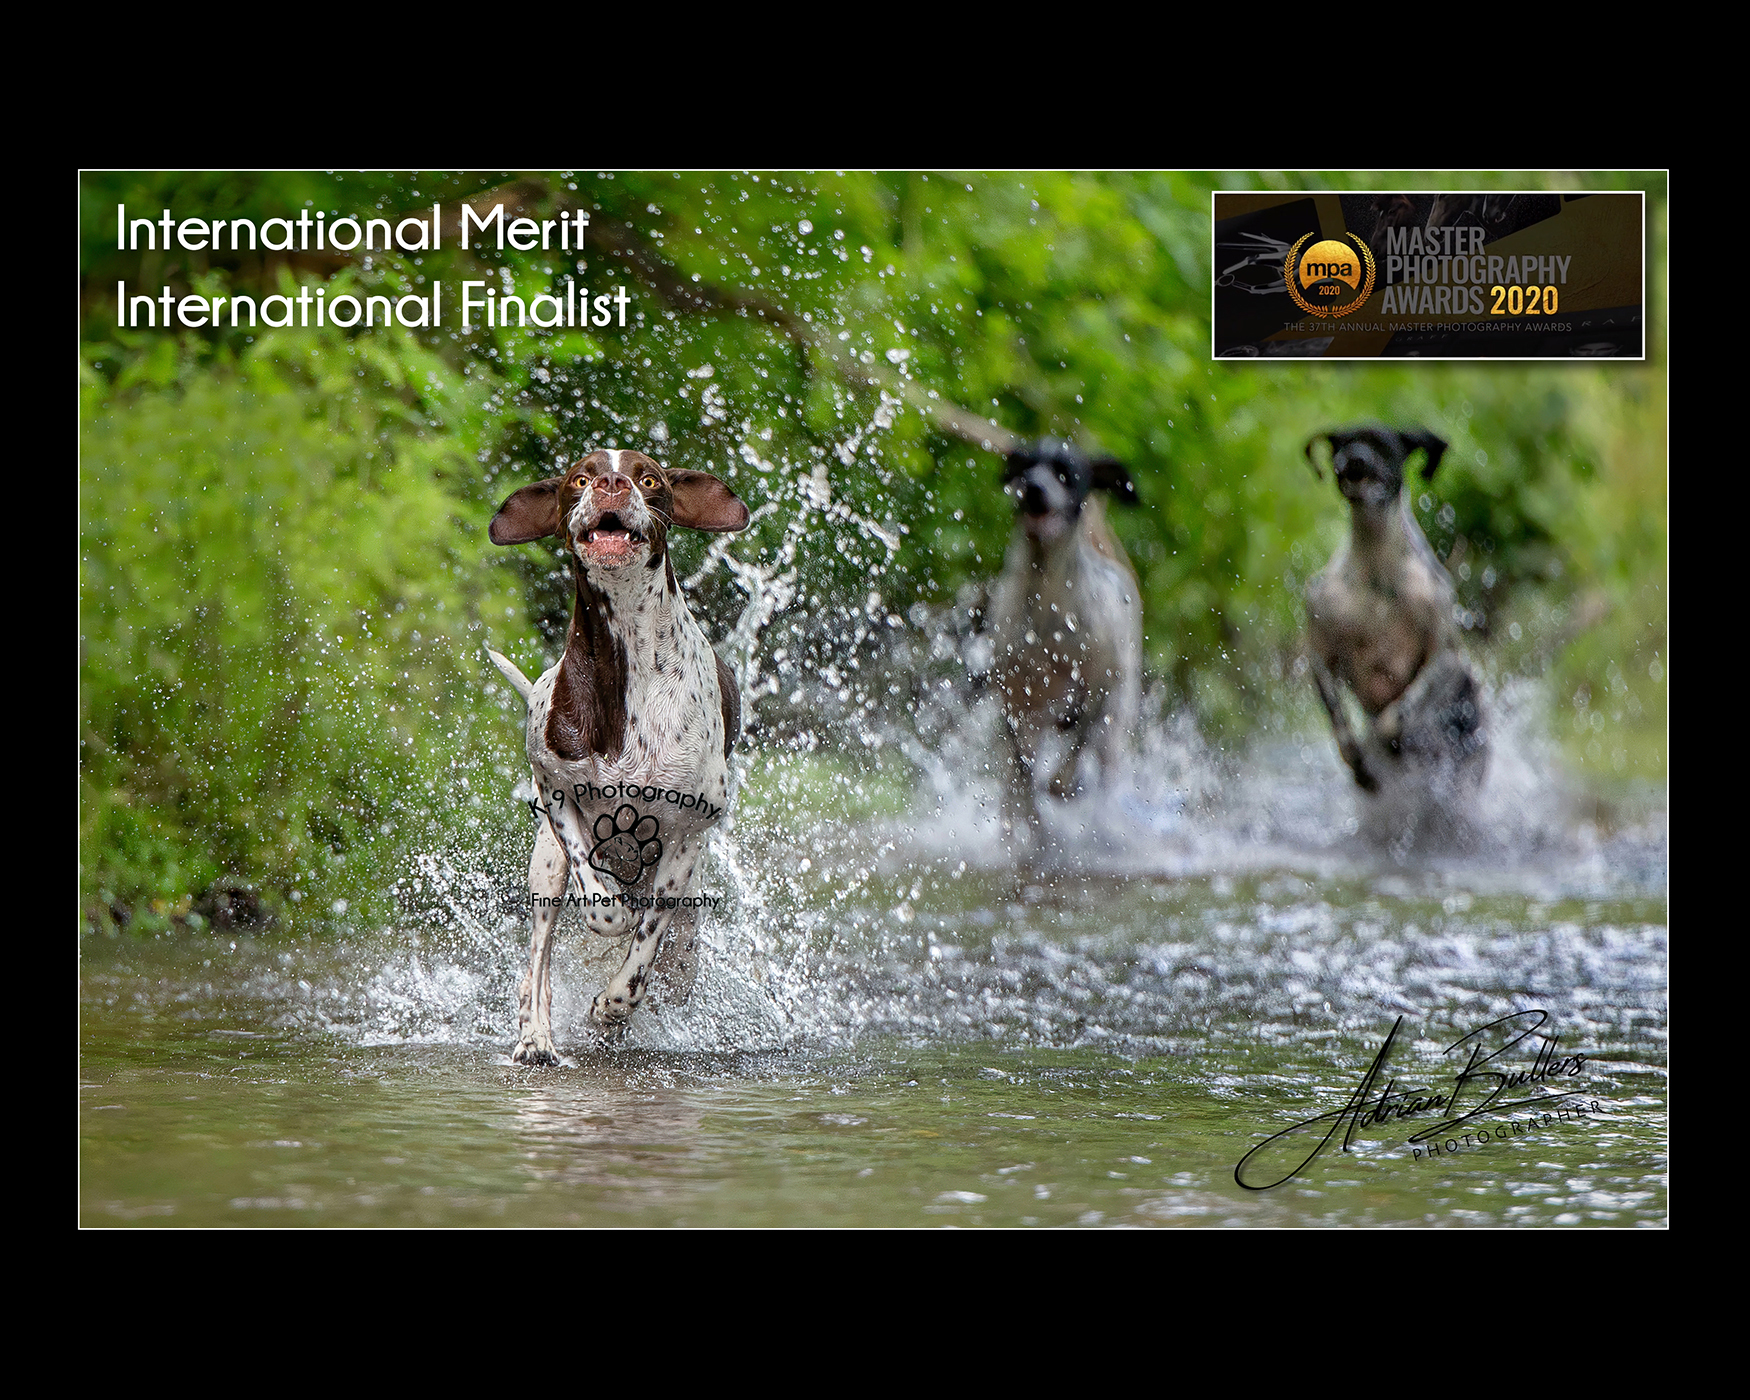 Dogs in Action by Master dog photographer Adrian Bullers